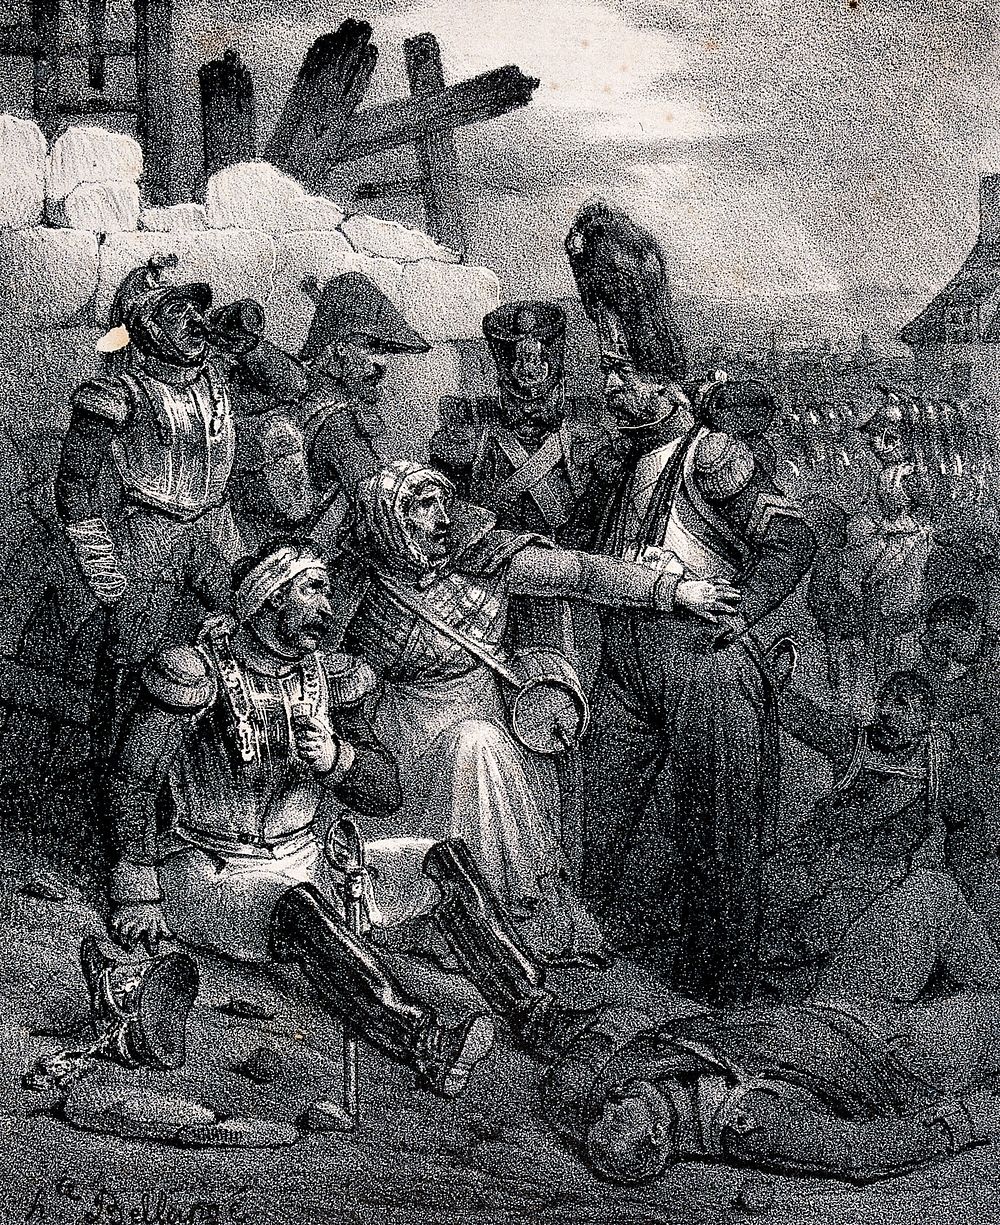 A woman shields a wounded man on a battle field from the soldiers around him. Lithograph by Joseph Louis-Hippolyte Bellangé.